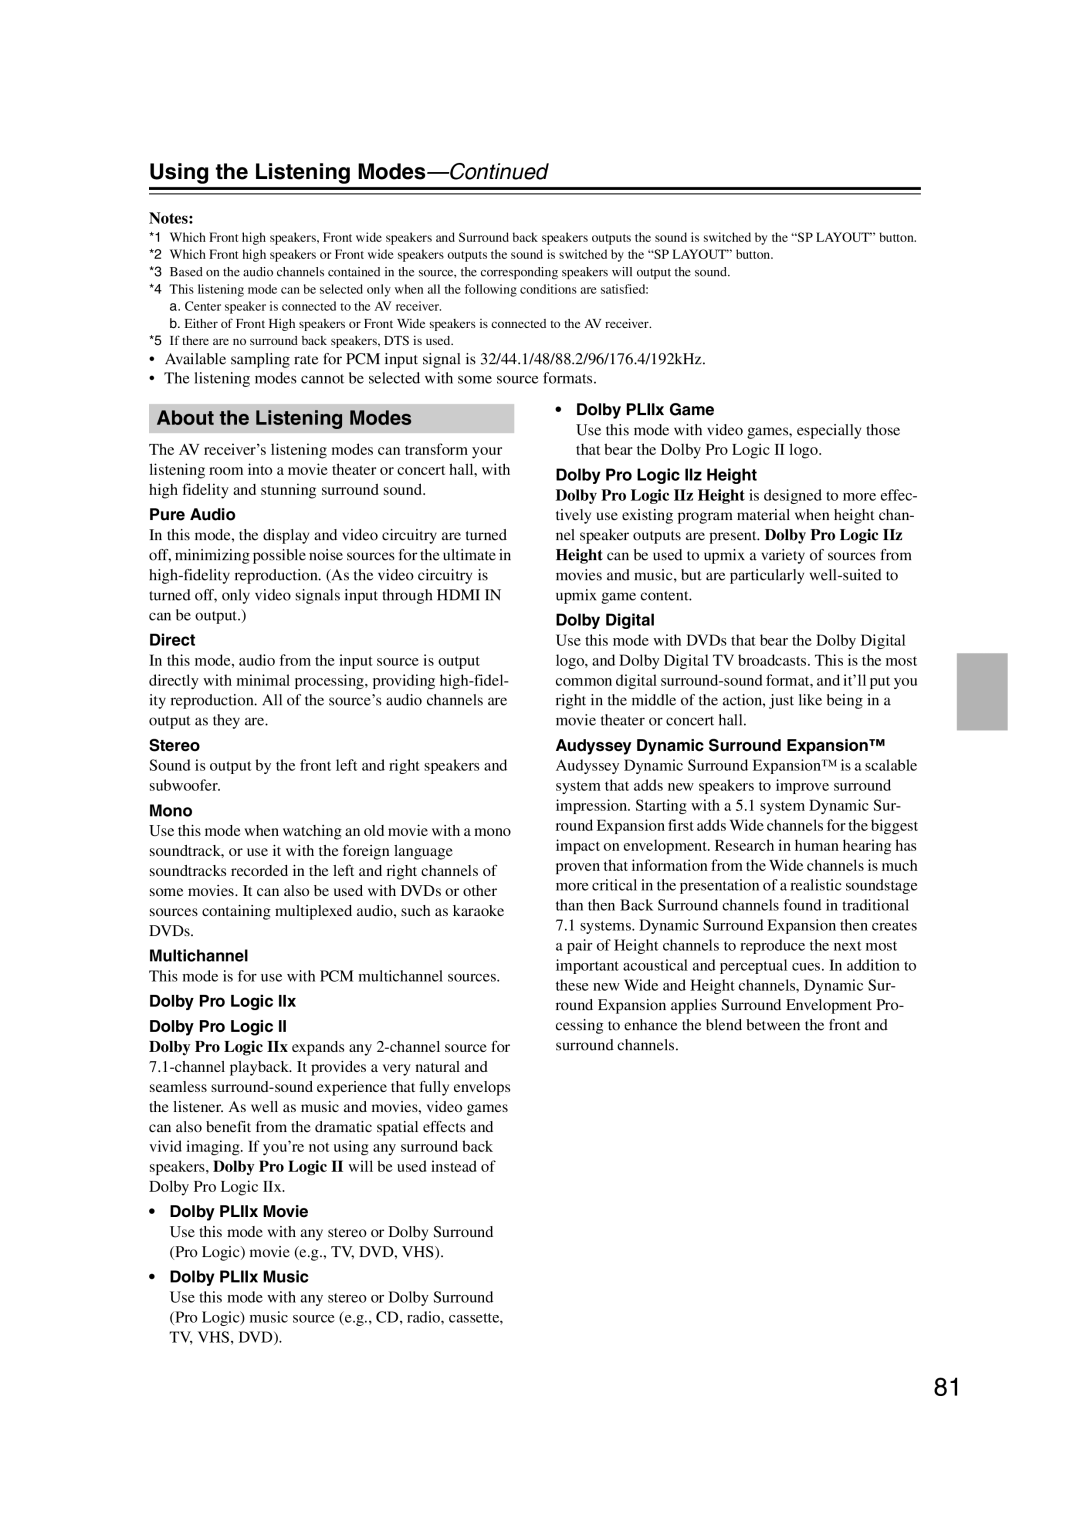 Onkyo 29400021, HT-RC180, TX-NR807 instruction manual About the Listening Modes, Using the Listening Modes—Continued, Notes 